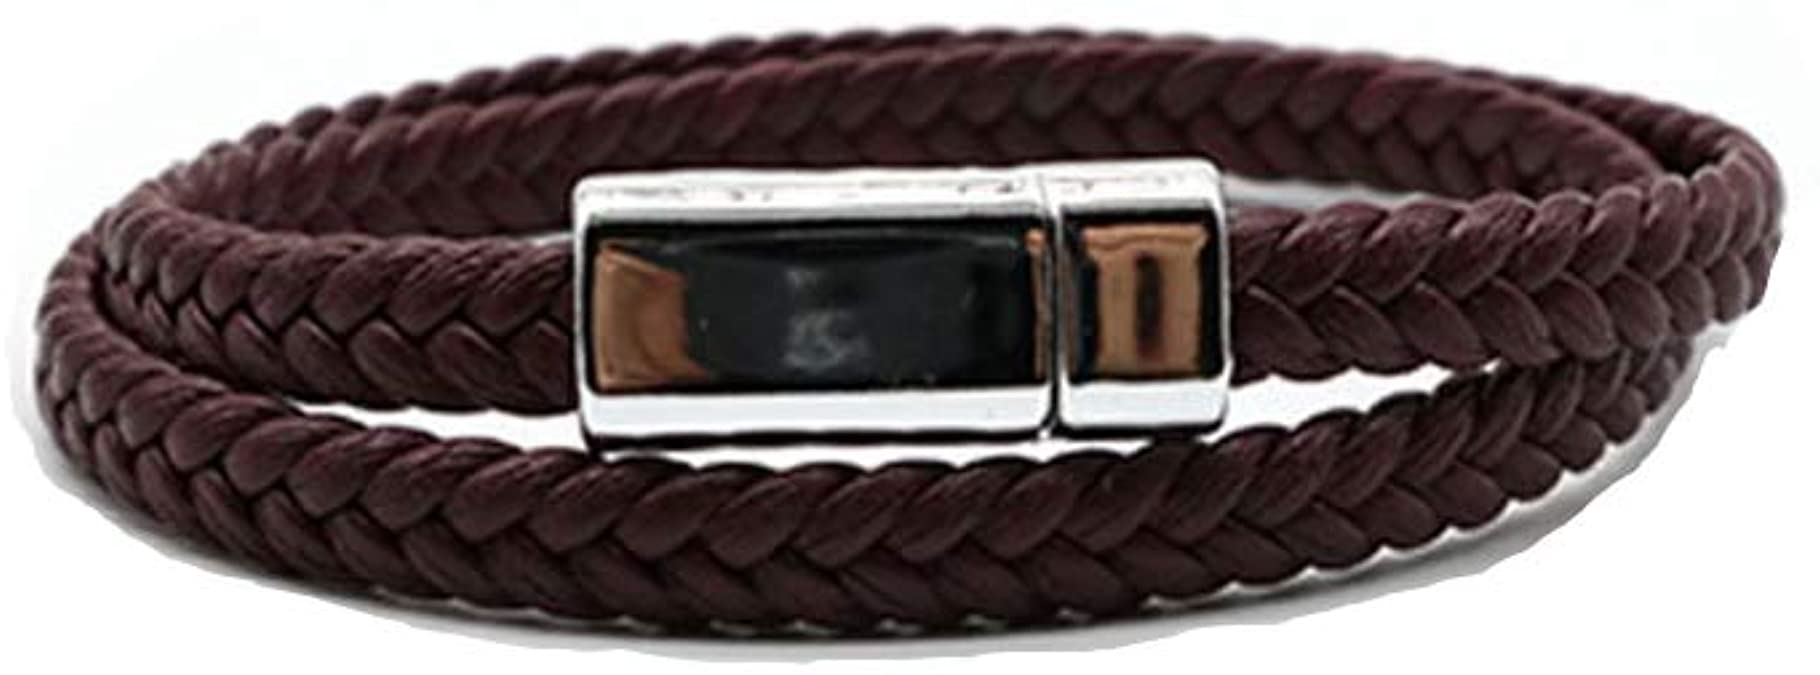 Bracelets for Men Leather Braided Mens Bracelet with Stainless Steel Magnetic Closure Mens Leather Bracelets (Style B-Brown)